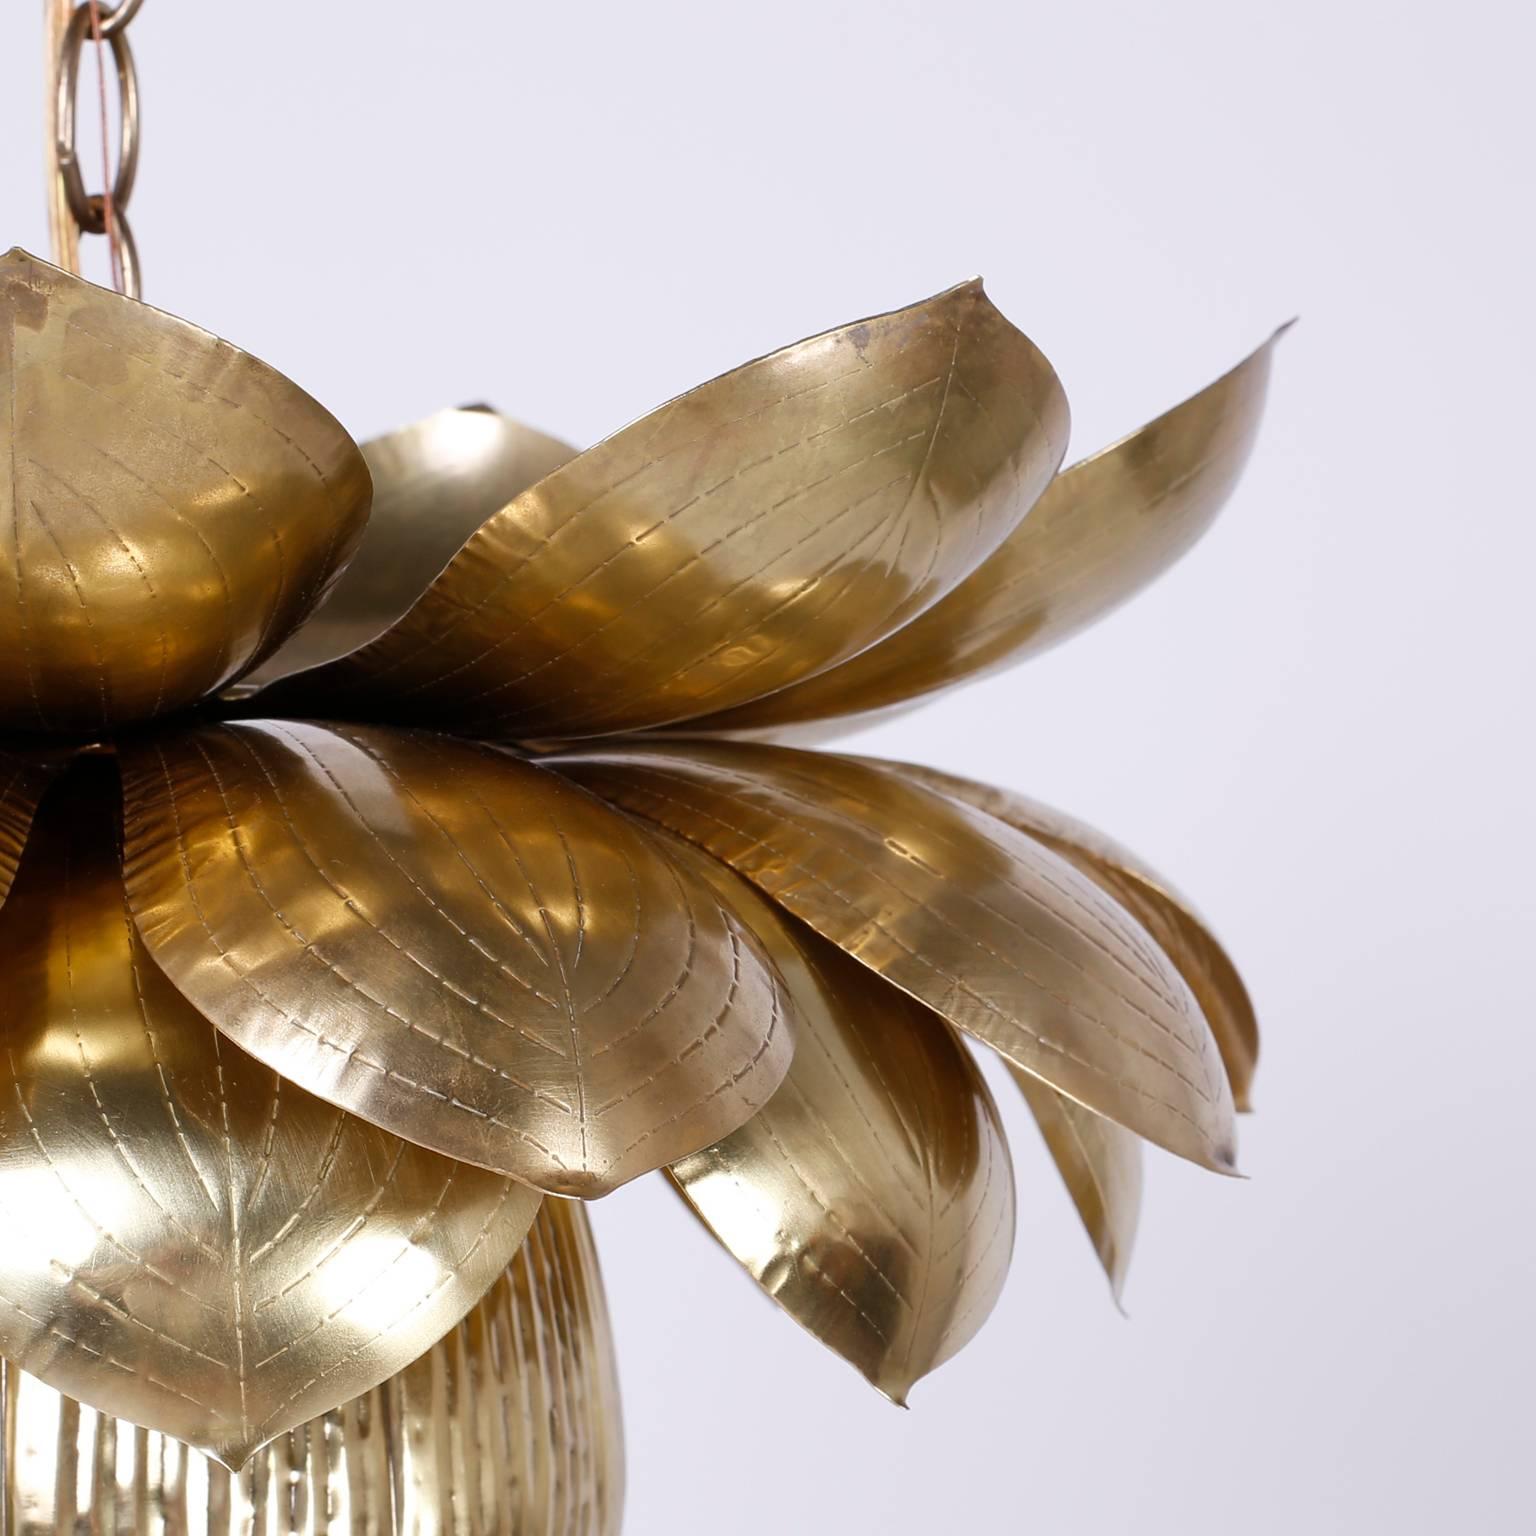 Chic lotus light fixture or pendant in a rare large size. Crafted in brass with a single bulb socket in the centre. Instant exotica for any interior. Newly wired.